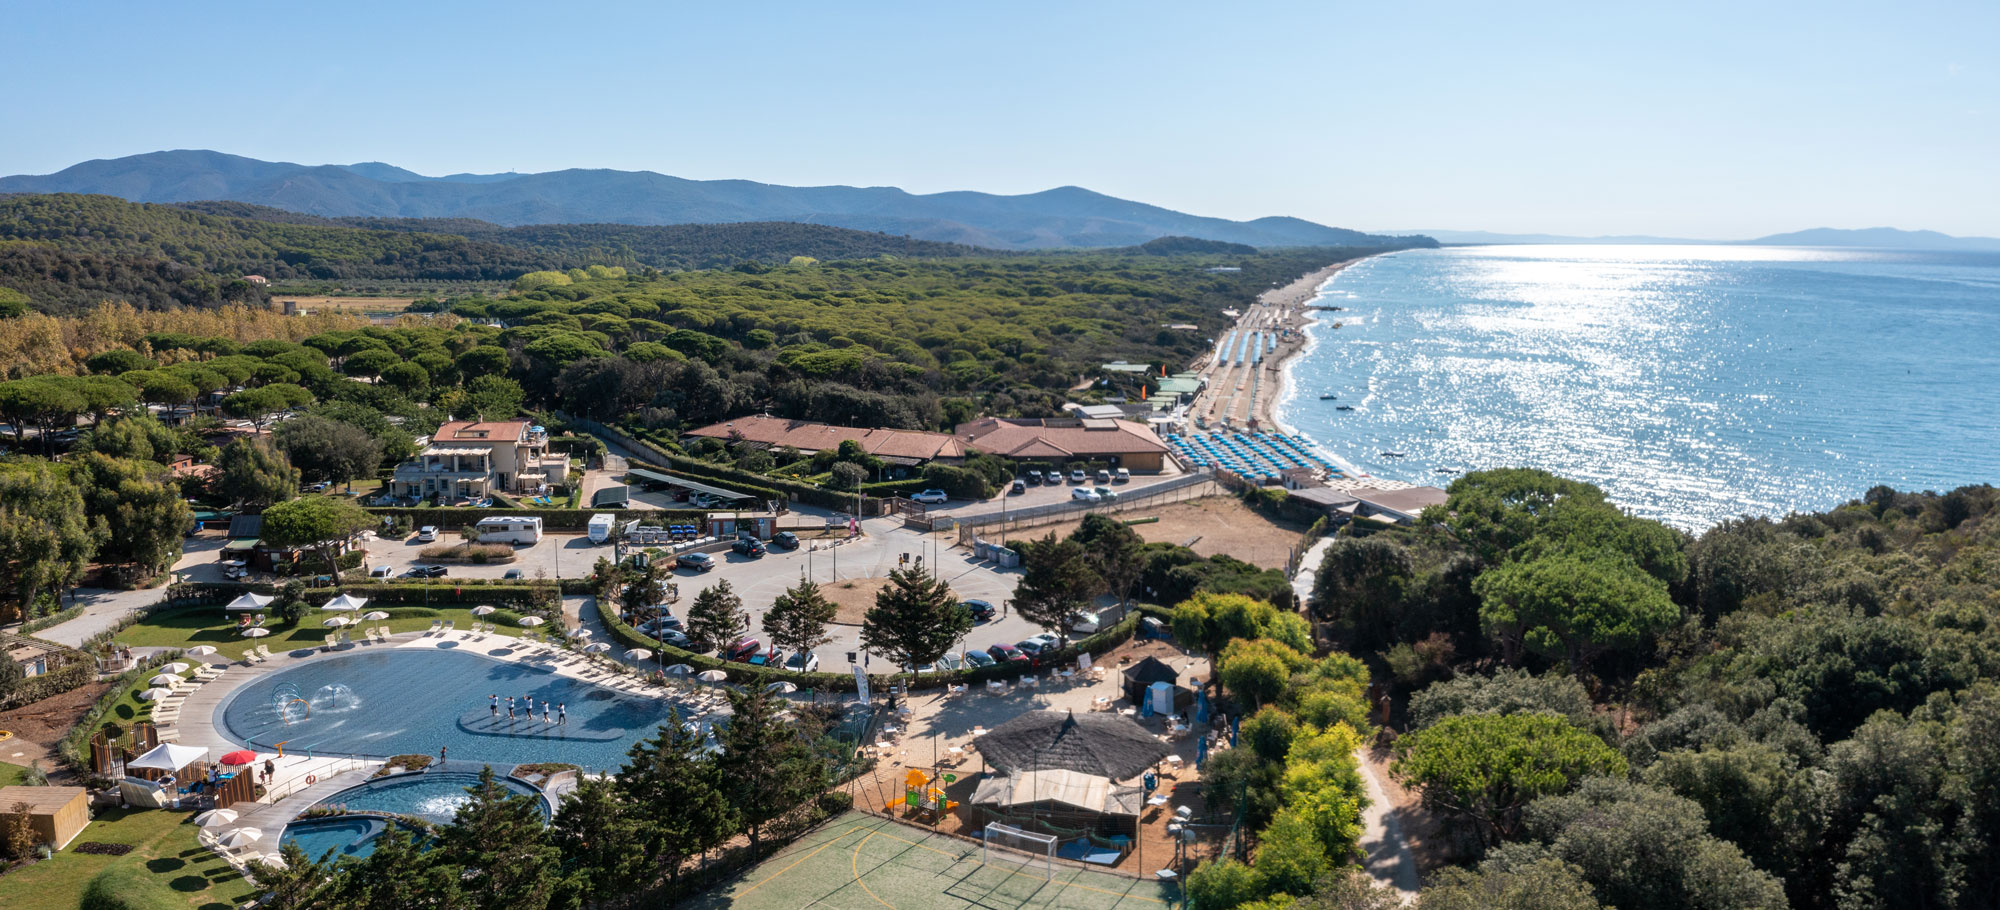 All the information you need about Stella del Mare Family Camping Village